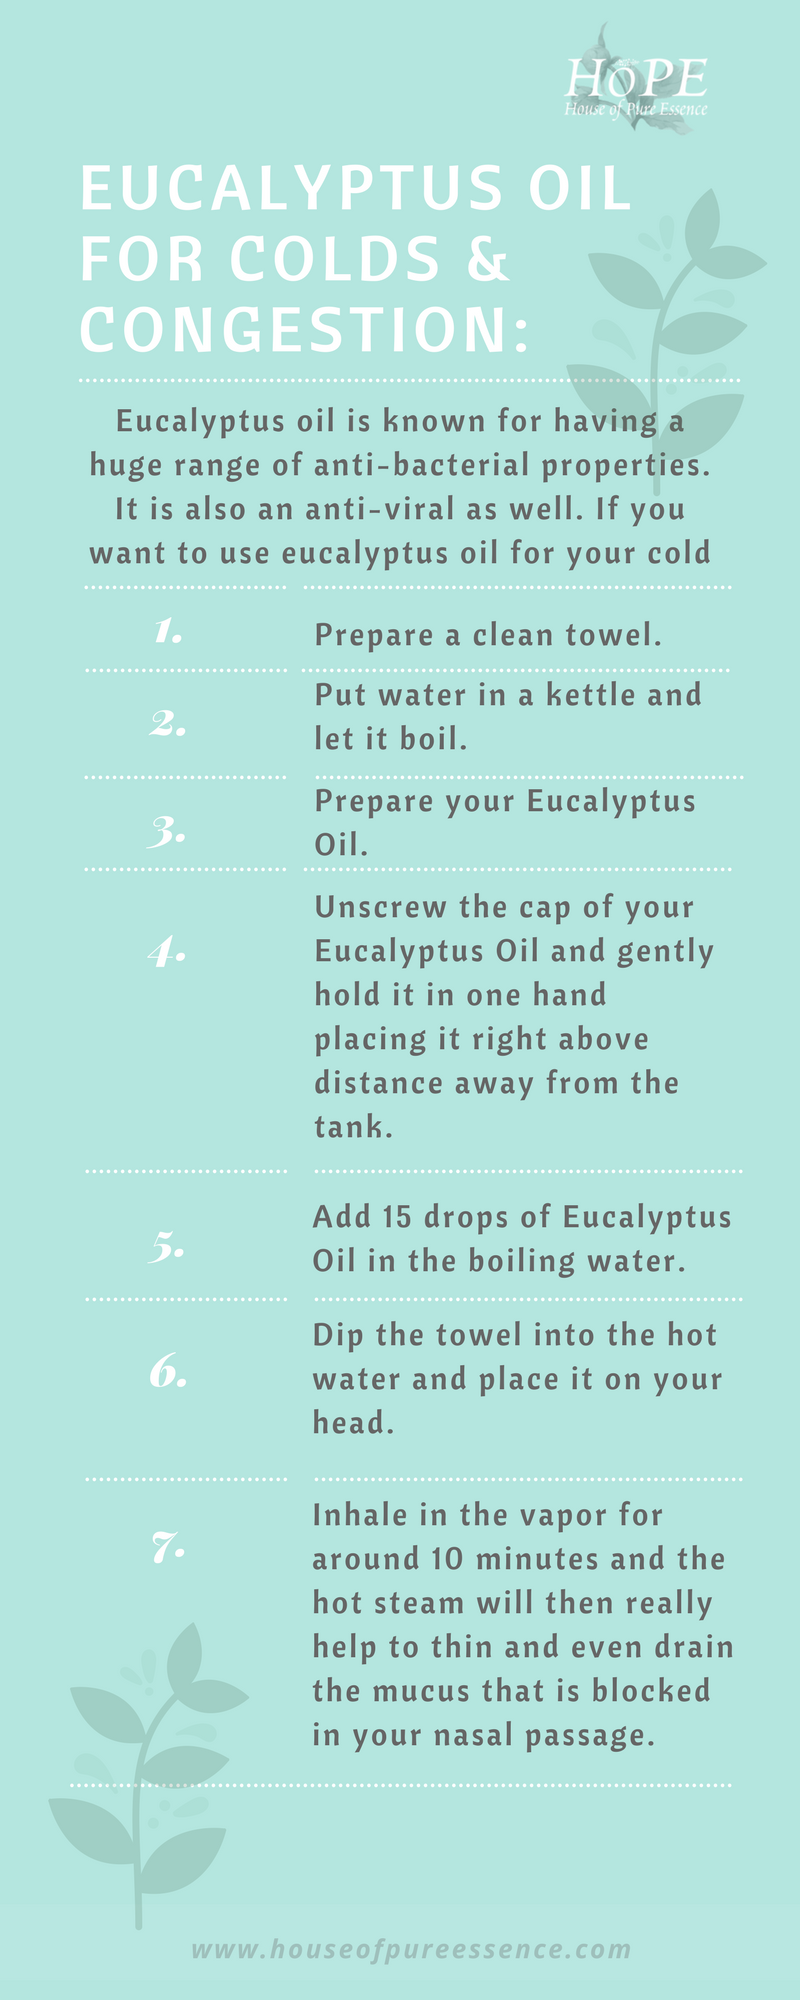 Hope Eucalyptus Oil for colds and congestion